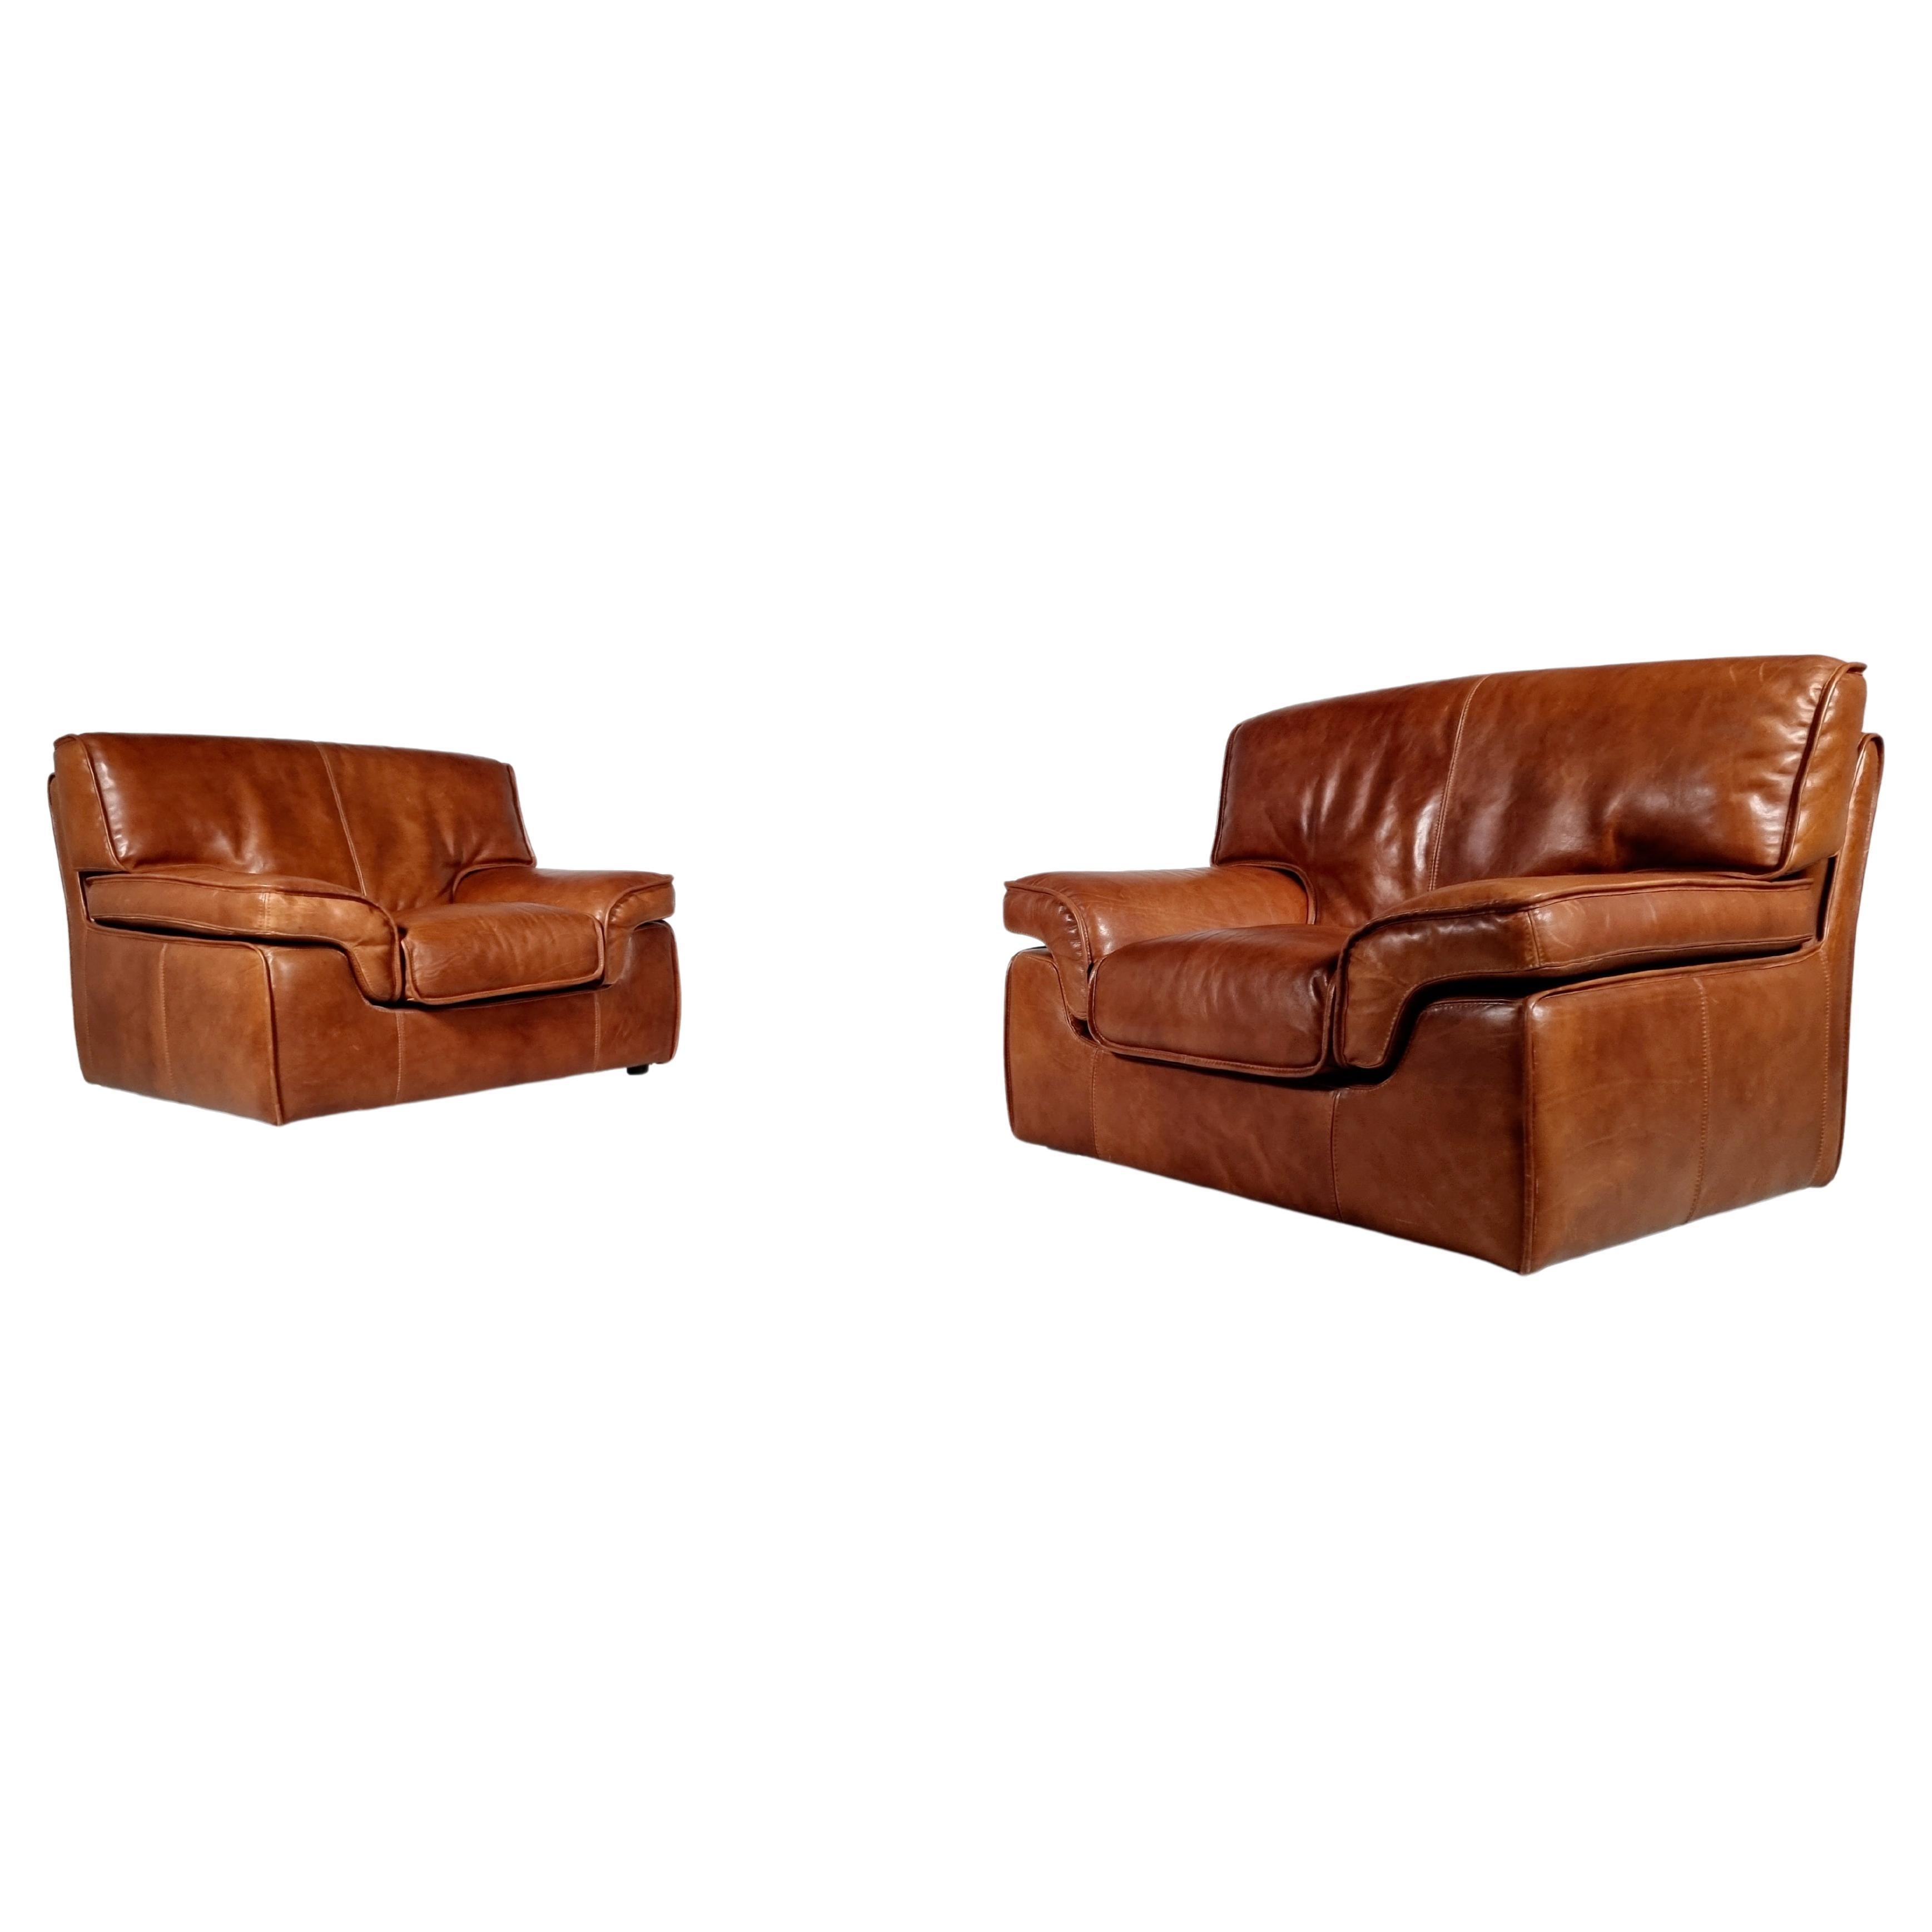 Pair of Huge Italian Lounge Chairs in Cognac Buffalo Leather, 1970s For Sale